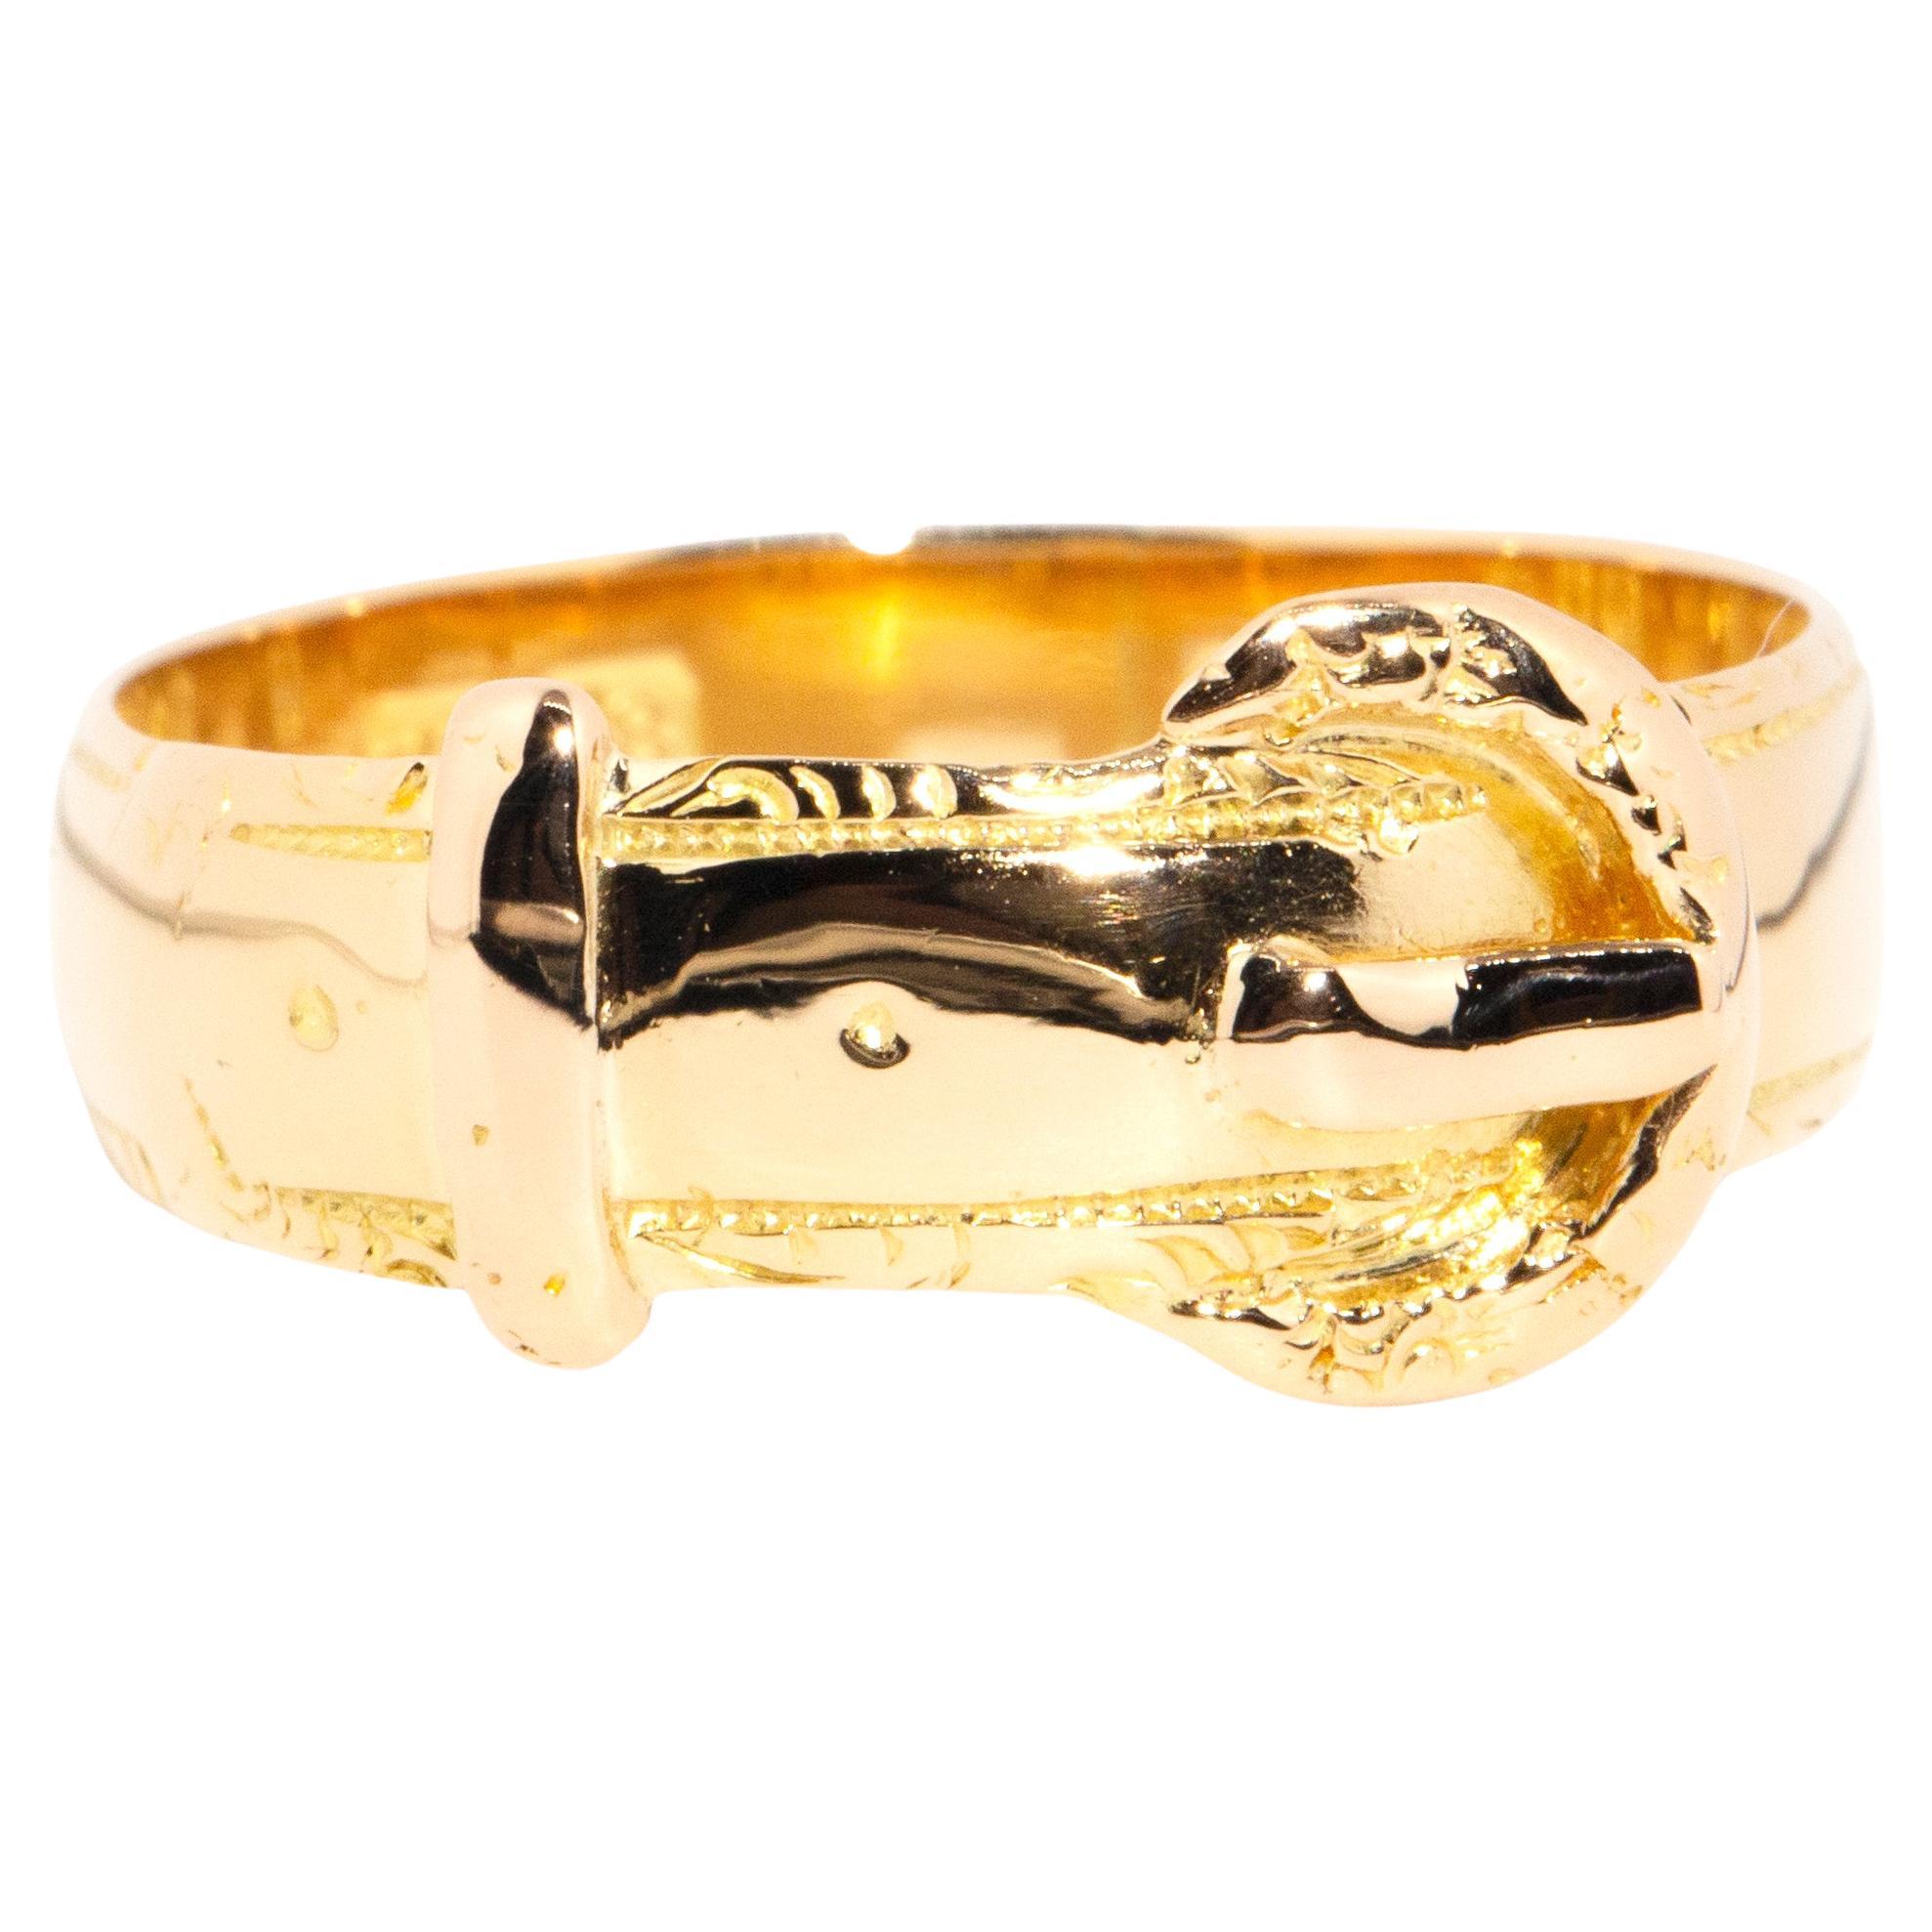 Antique Edwardian Era Engraved Belt and Buckle Band Ring in 18 Carat Yellow Gold